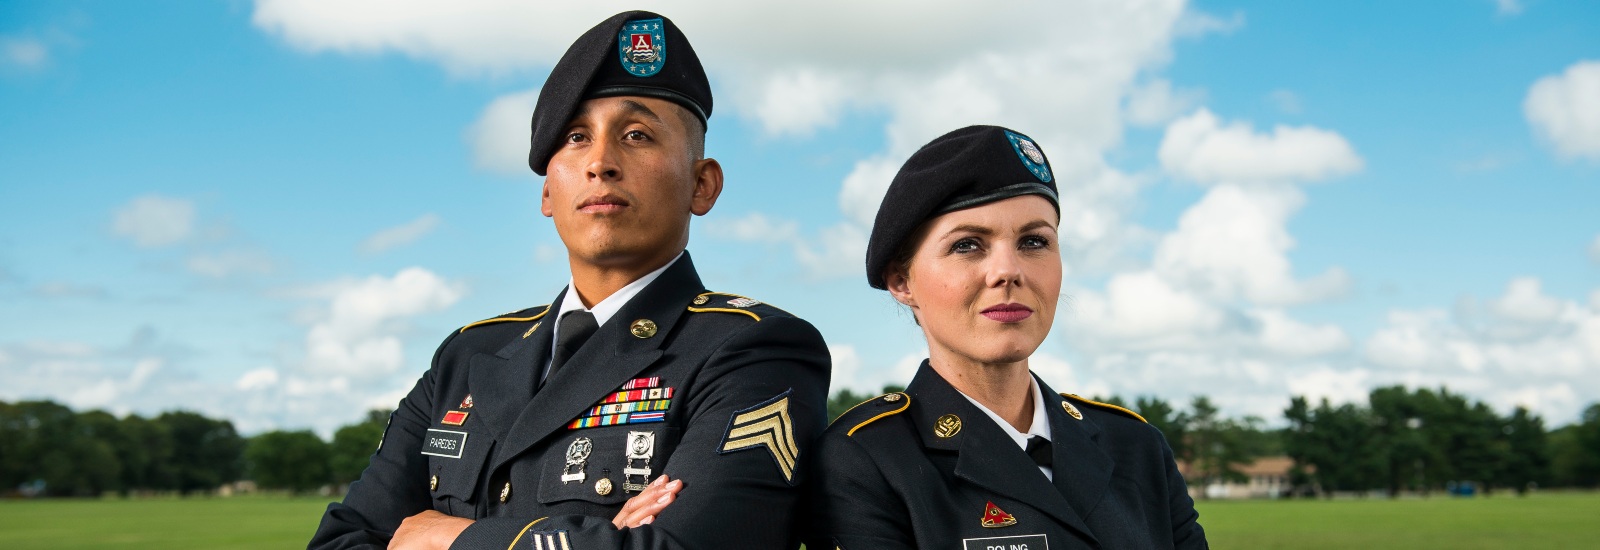 United States Uniformed Service branch members from the Army Reserve pose for a promotional photoshoot. 